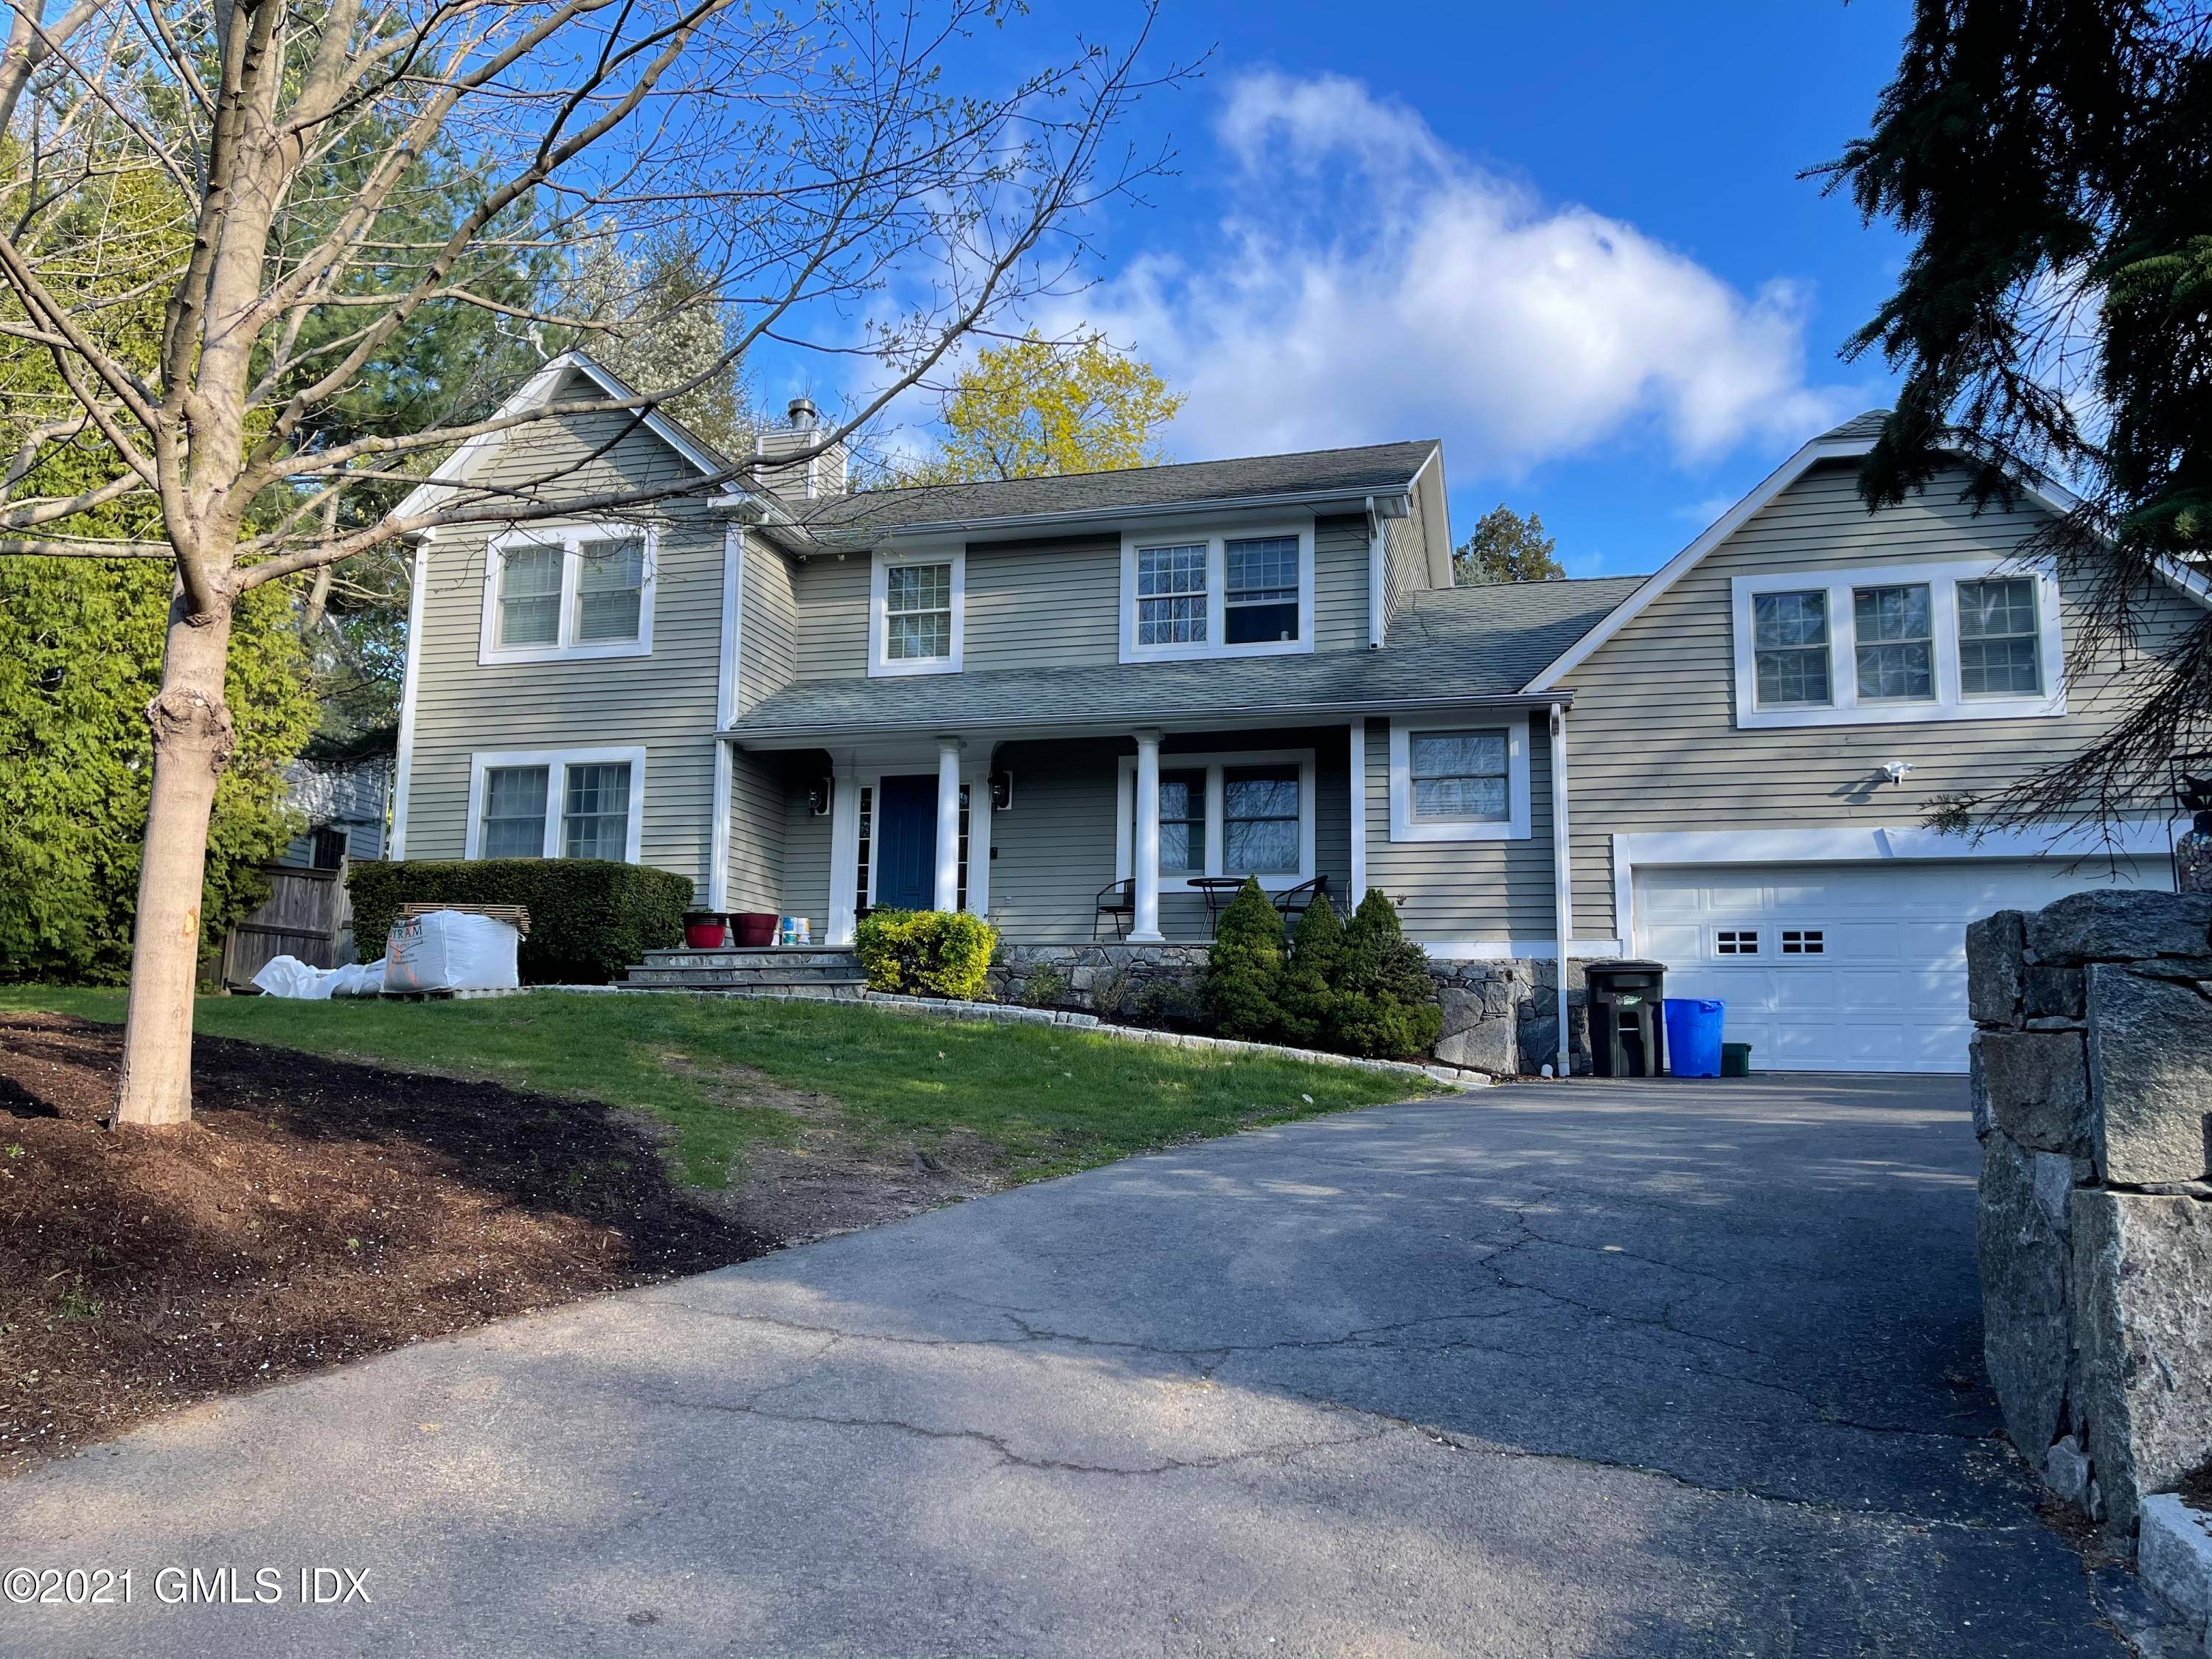 Beautiful Colonial with 4 bedroom, 2 1 2 baths, updated kitchen, large bonus room above the garage.